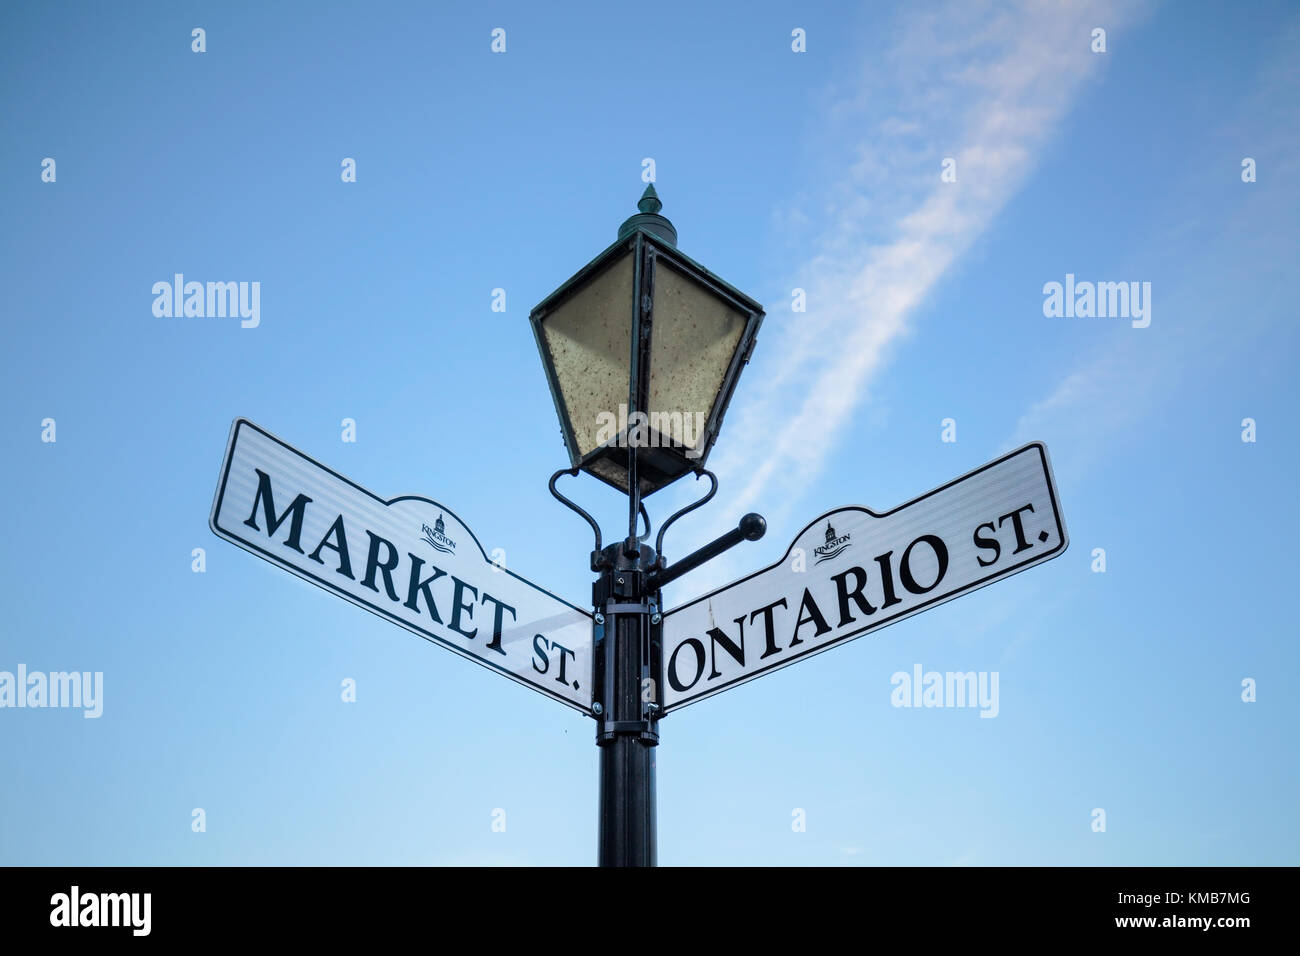 A lamp post displaying street signs at the intersection of Market Street and Ontario Street in Kingston, Ontario, Canada. Stock Photo